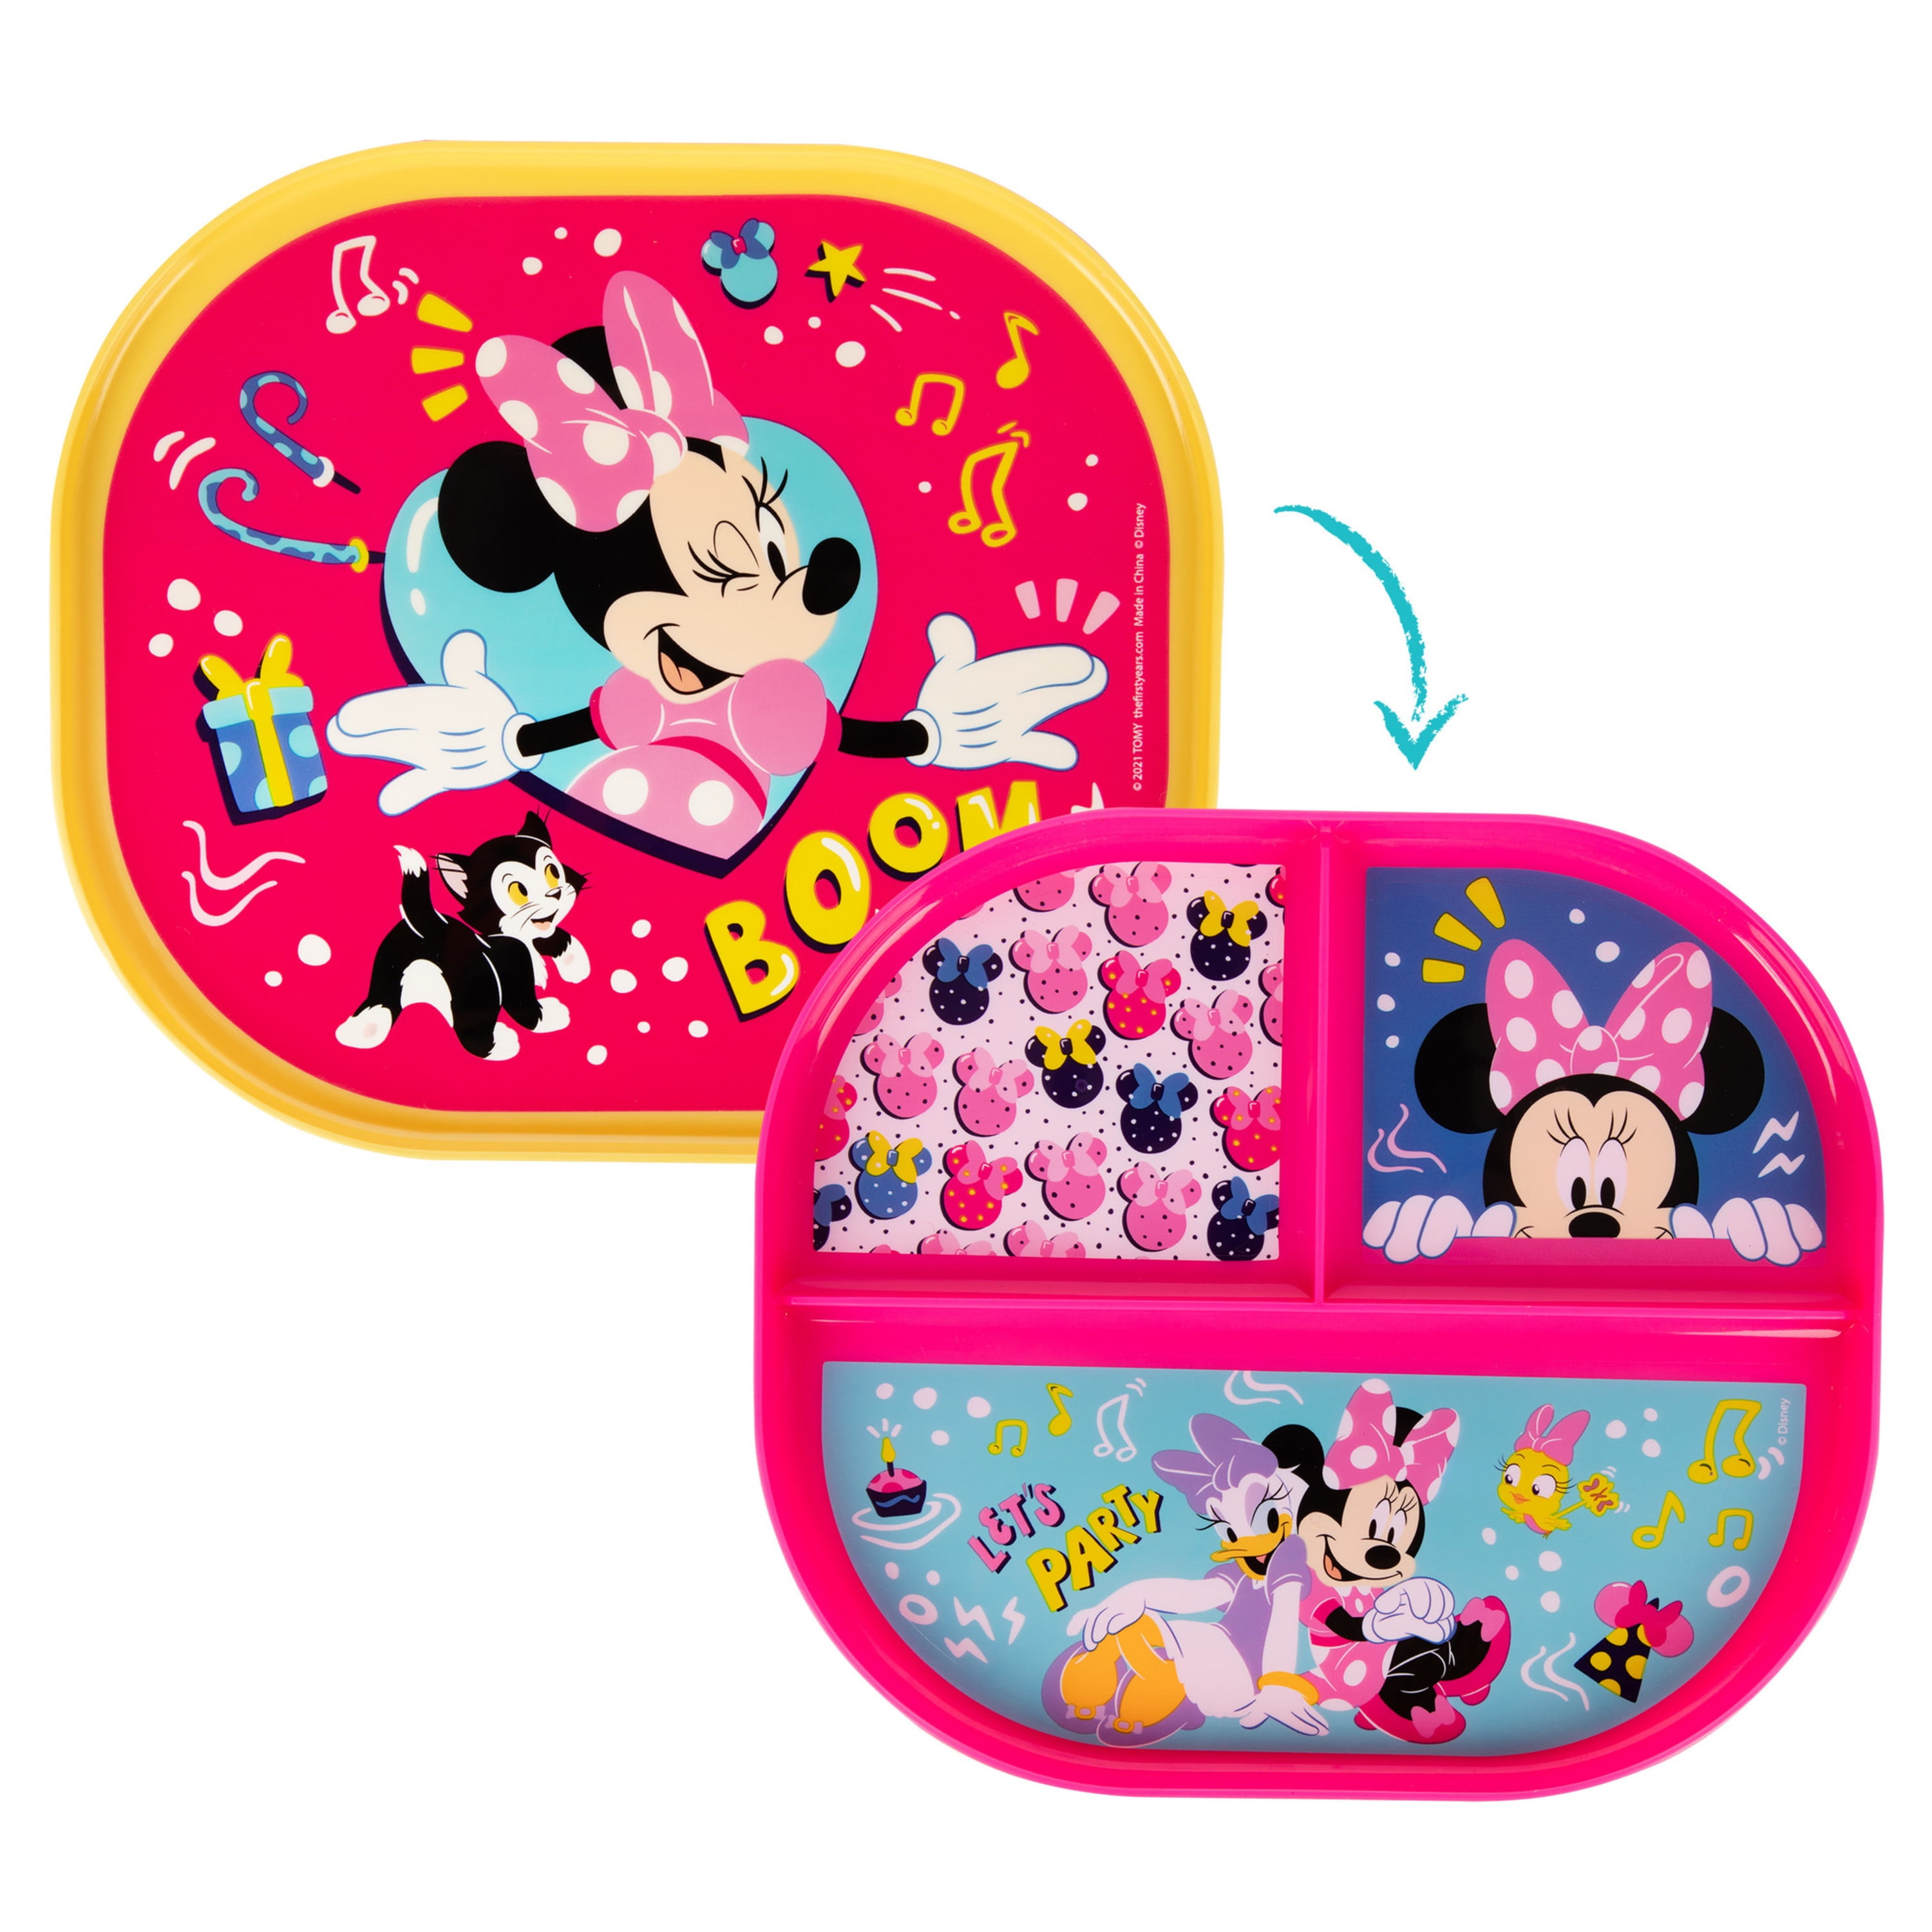 Disney Minnie Mouse 2-Sided Plate - Dishwasher Safe Toddler Plate